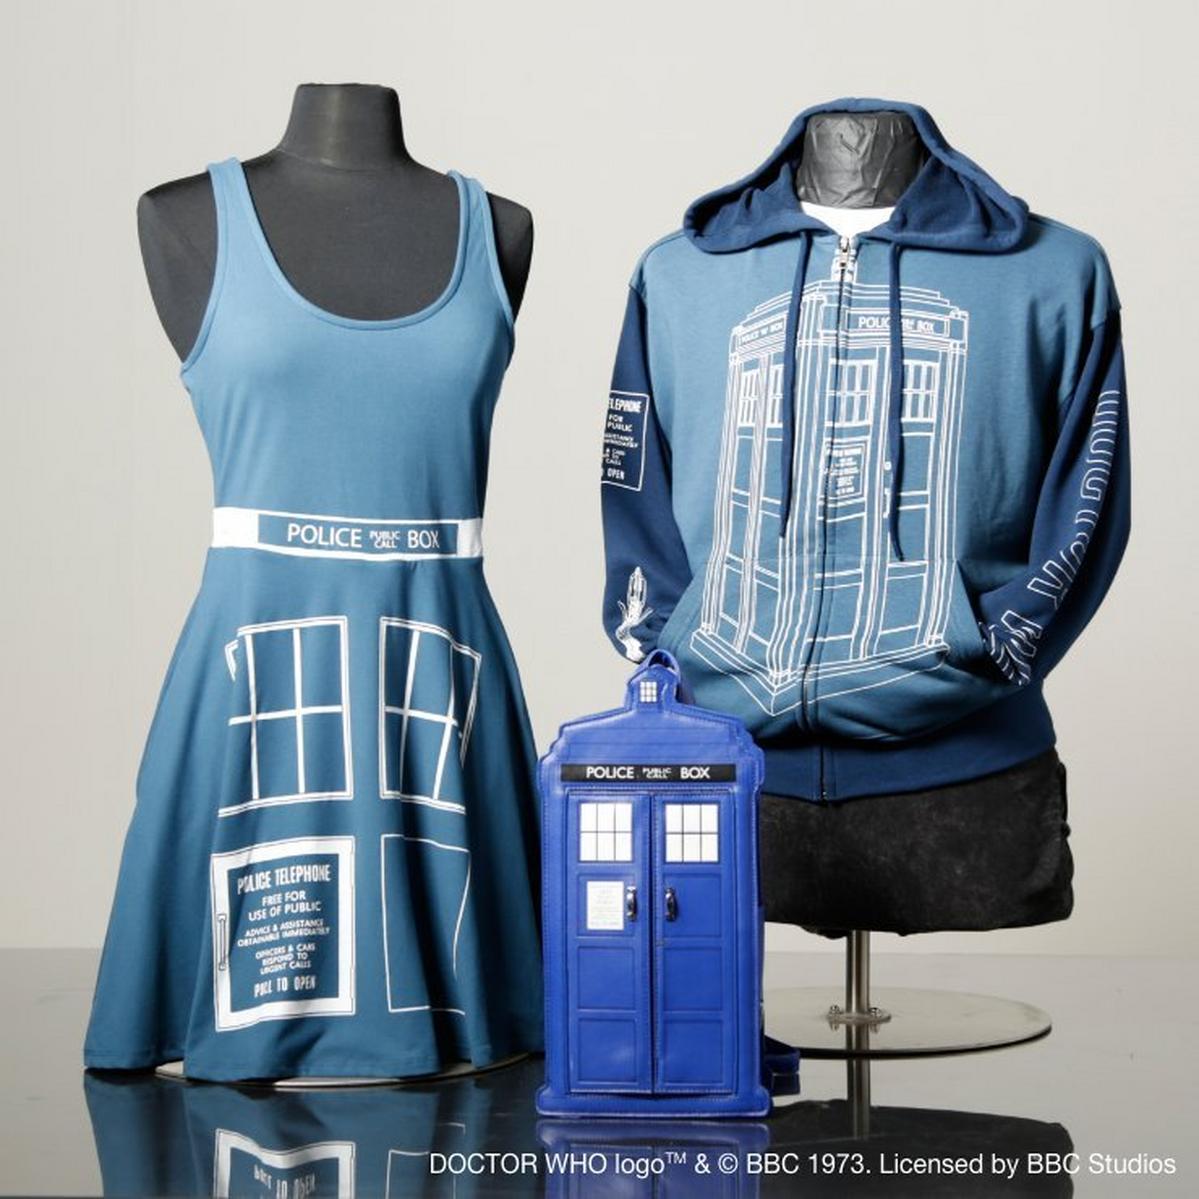 Shop Doctor Who